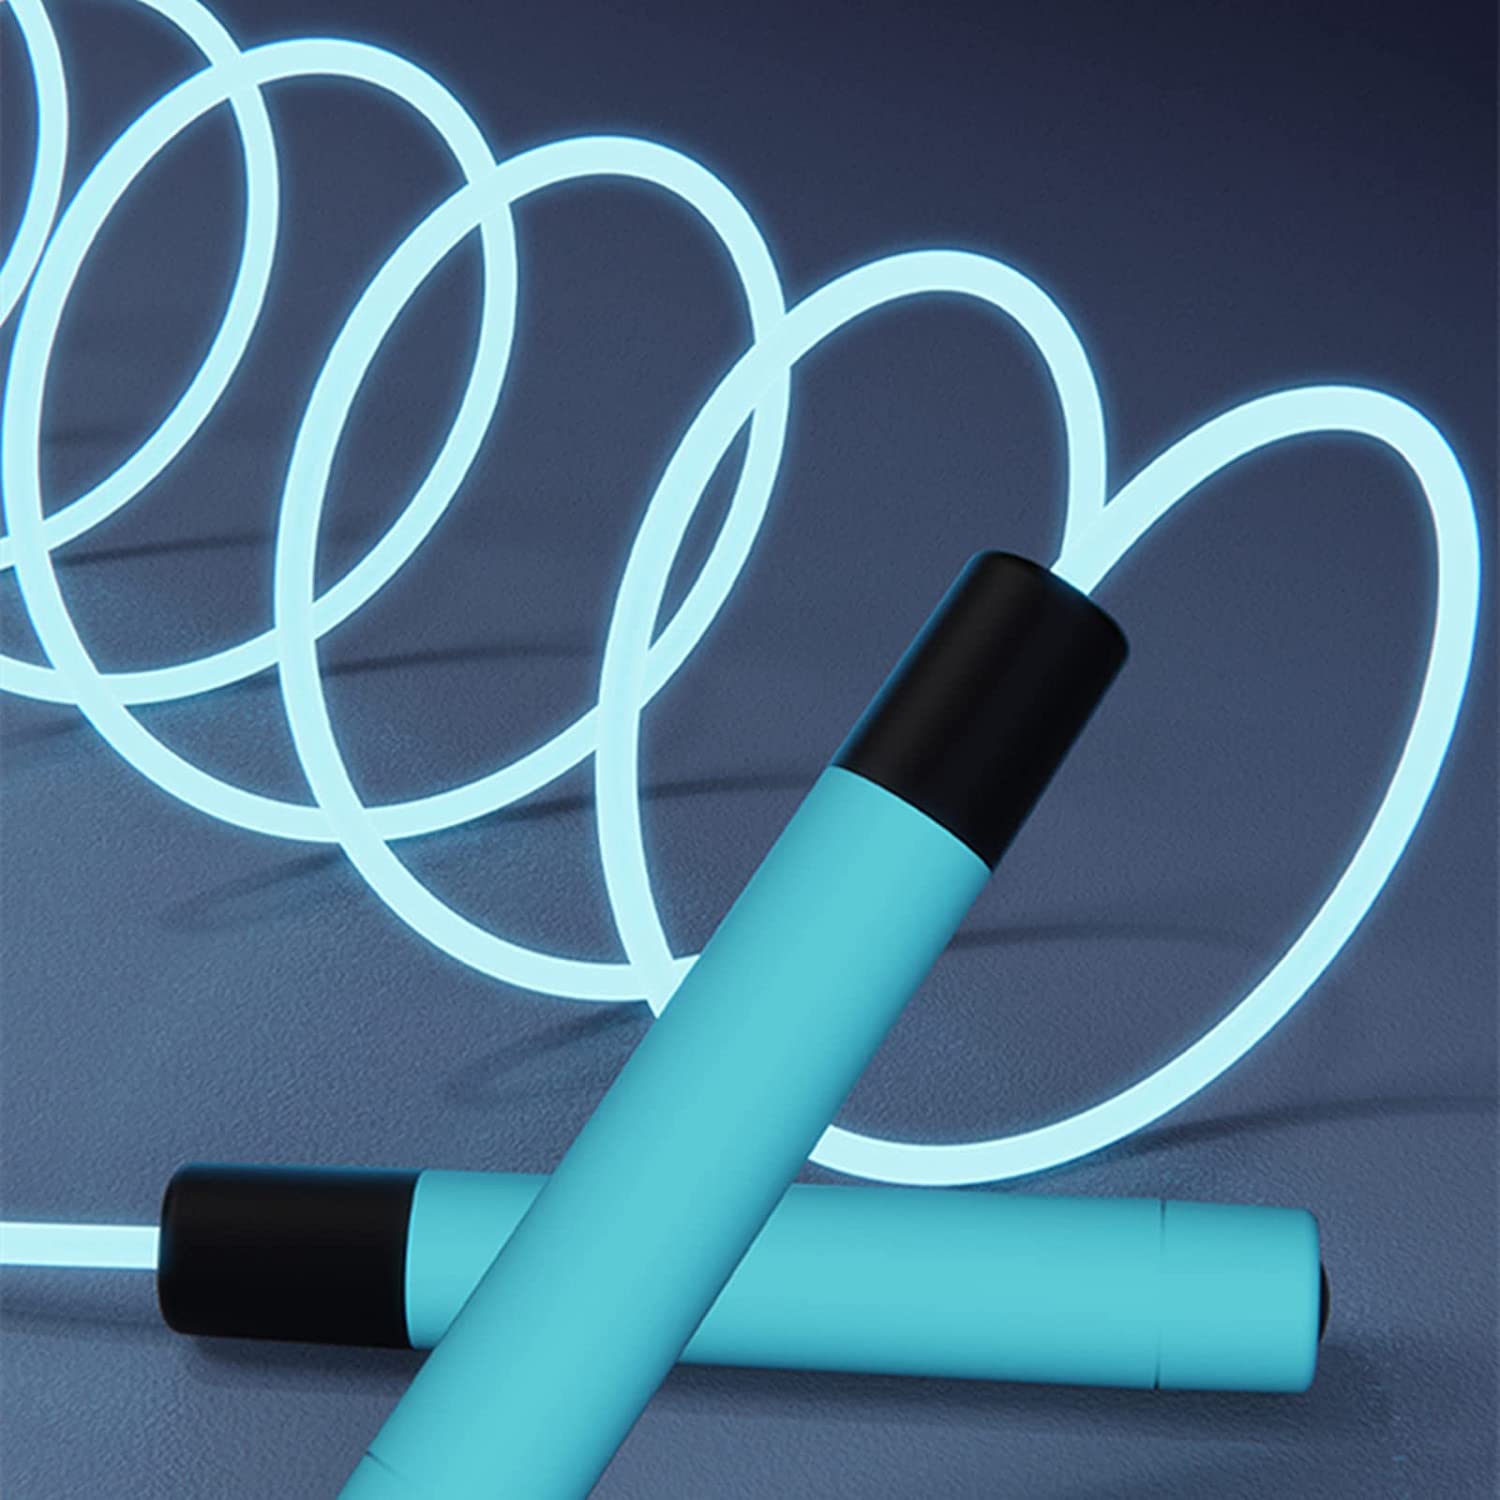 Led Light Up Jump Rope for Kids Children, Glowing Luminous Skipping Rope for Girls Women Men Working Out Exercise Weight Loss